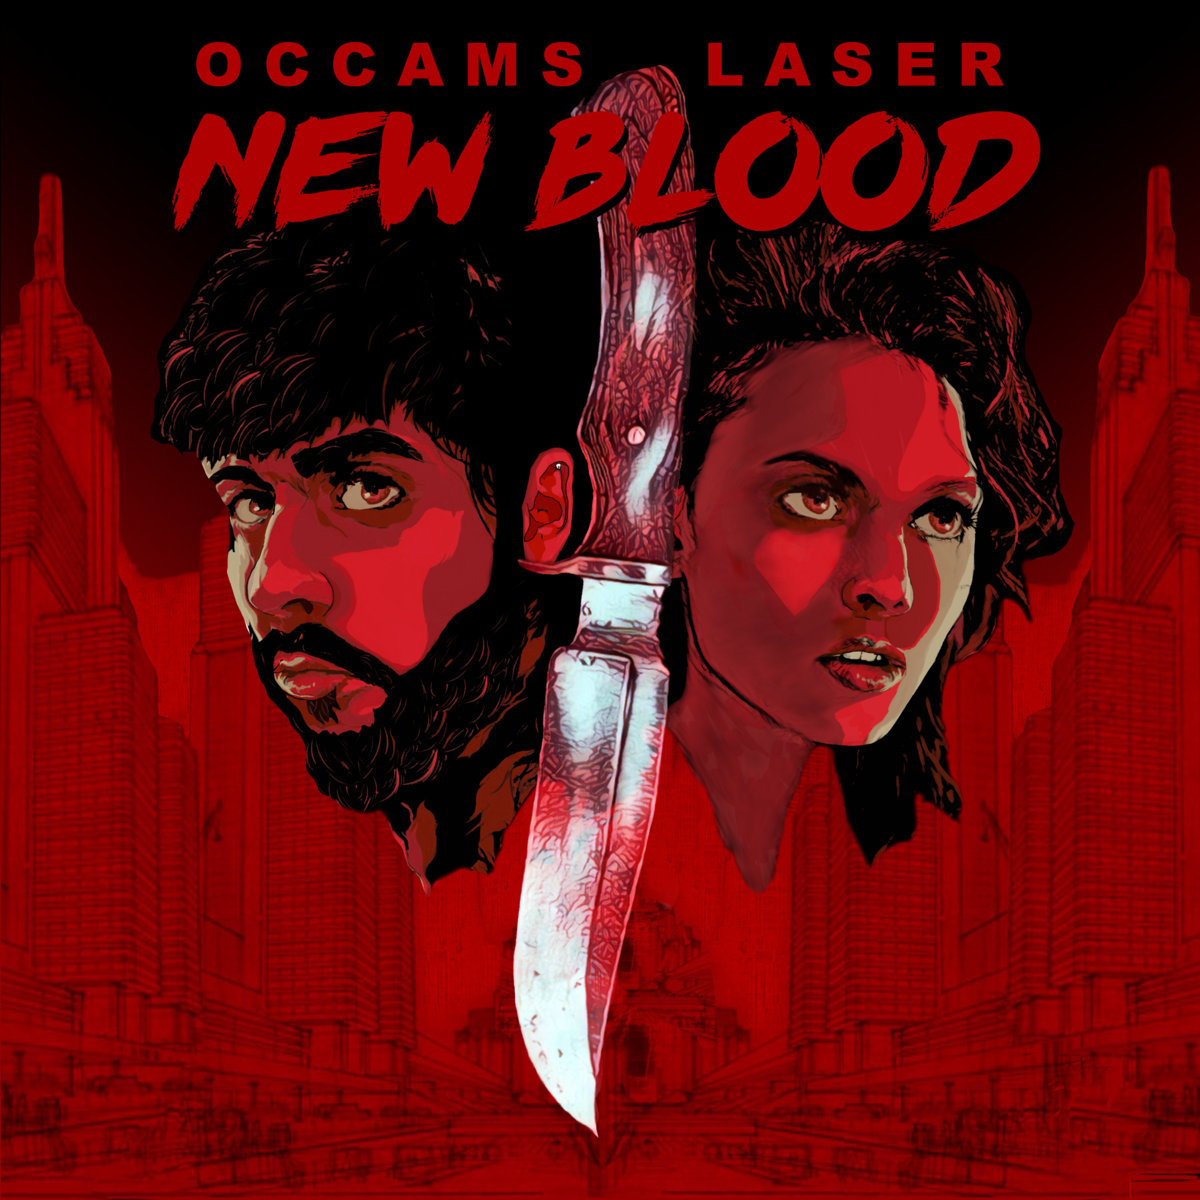 Occam's Laser New Blood - Music Review